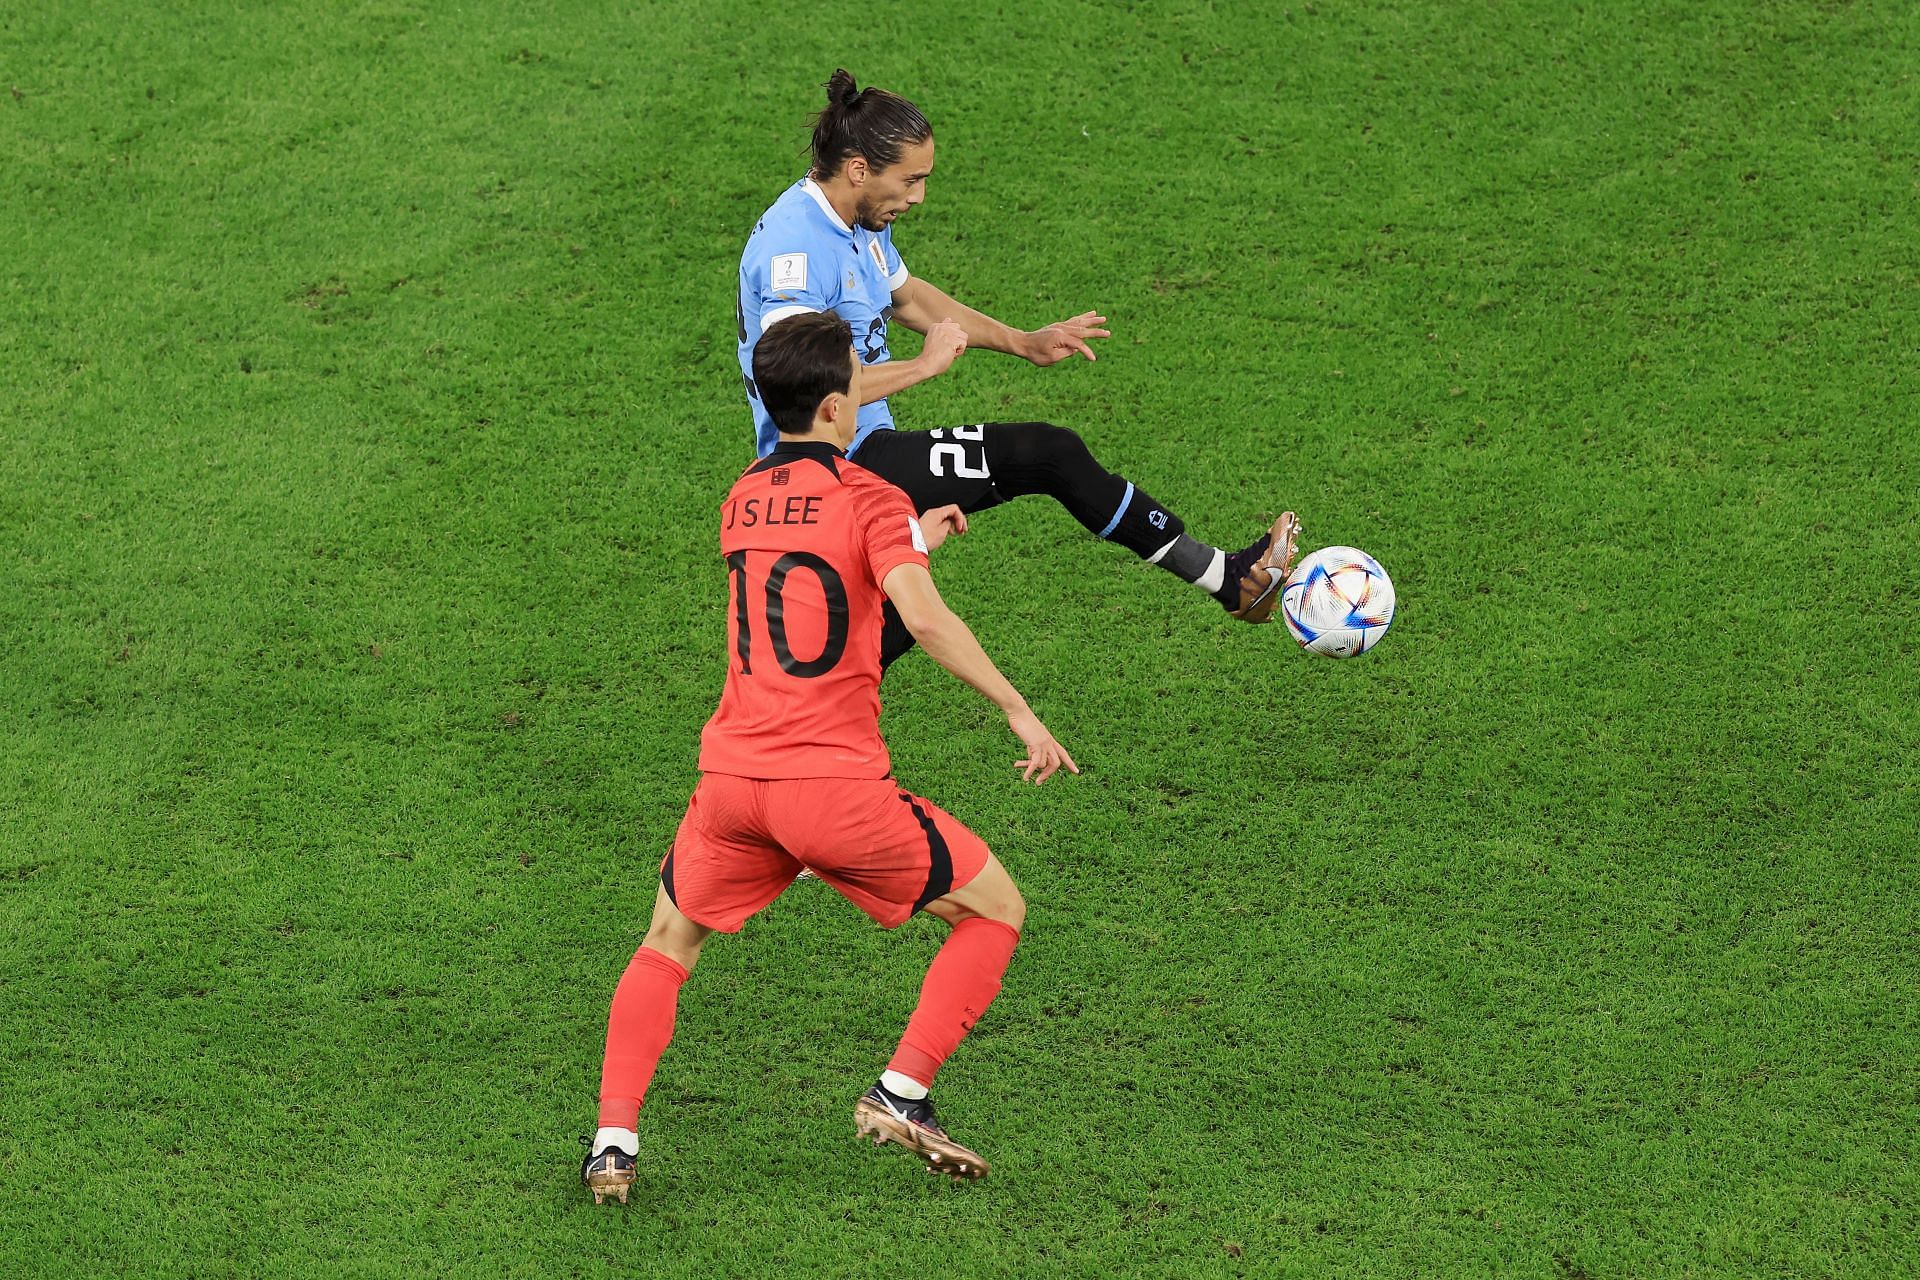 Martin Caceres controls the ball under pressure from Jaesung Lee.